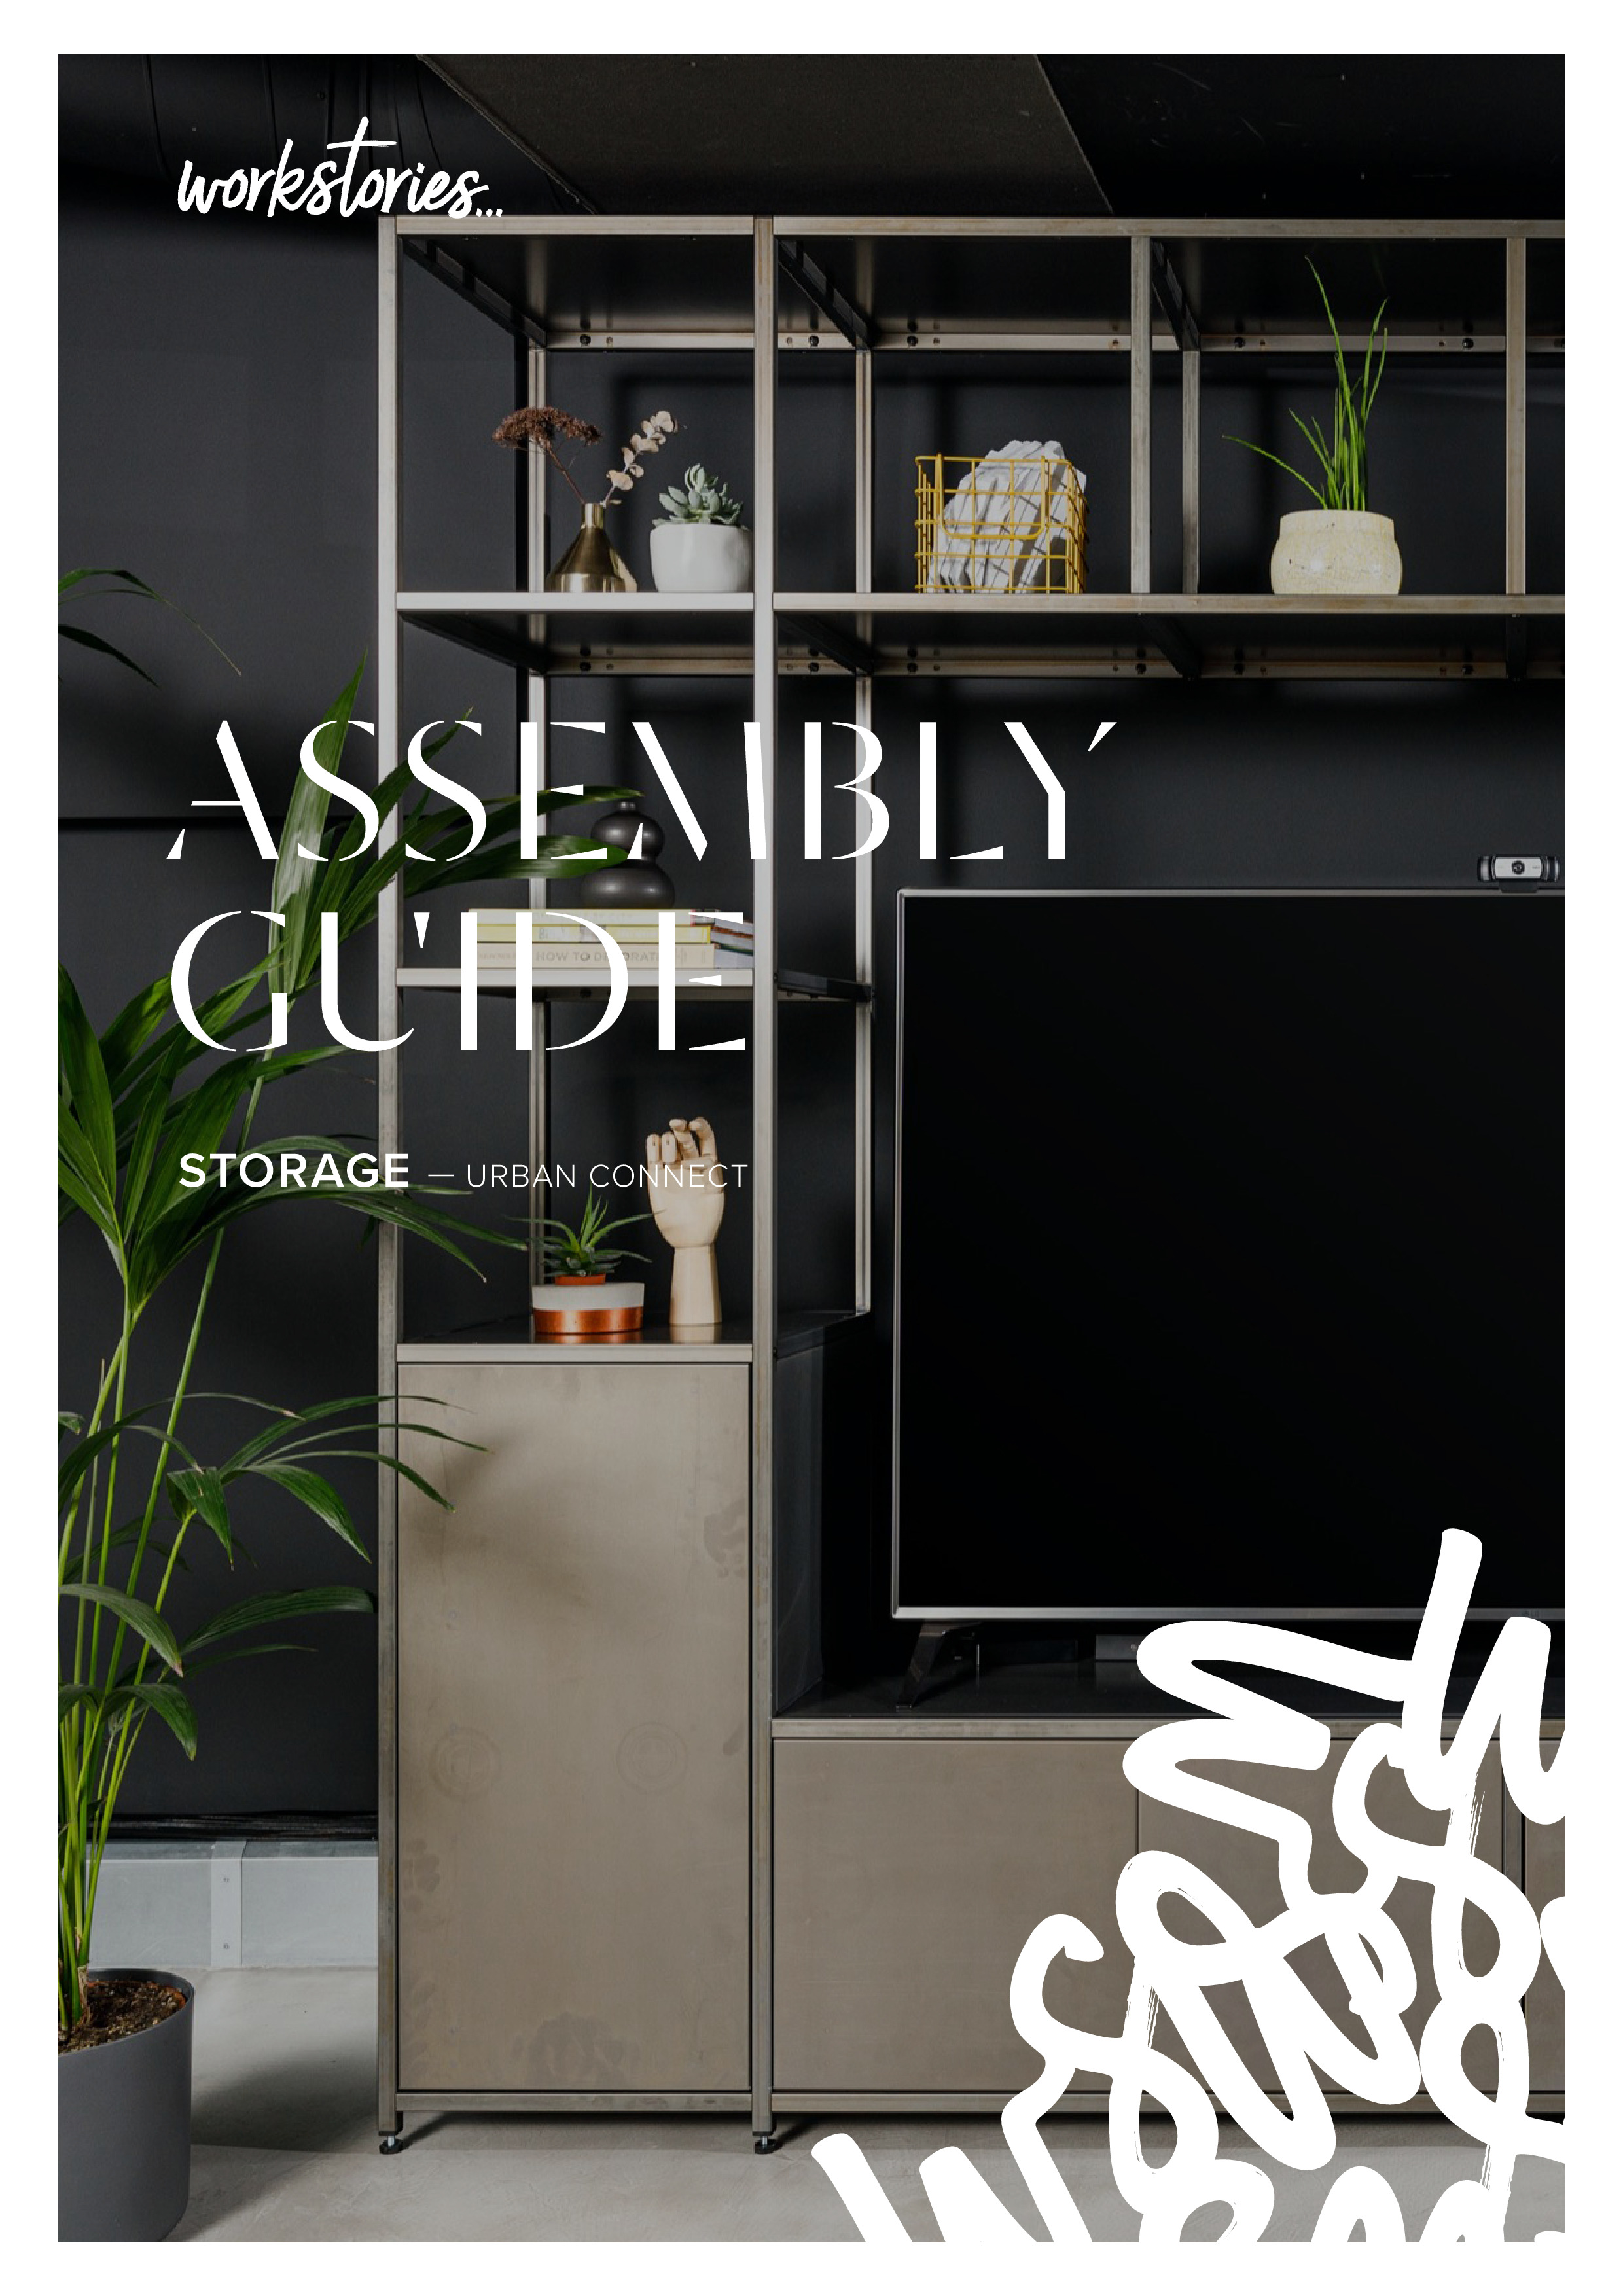 WS - ASSEMBLY GUIDE - Storage - Urban Connect